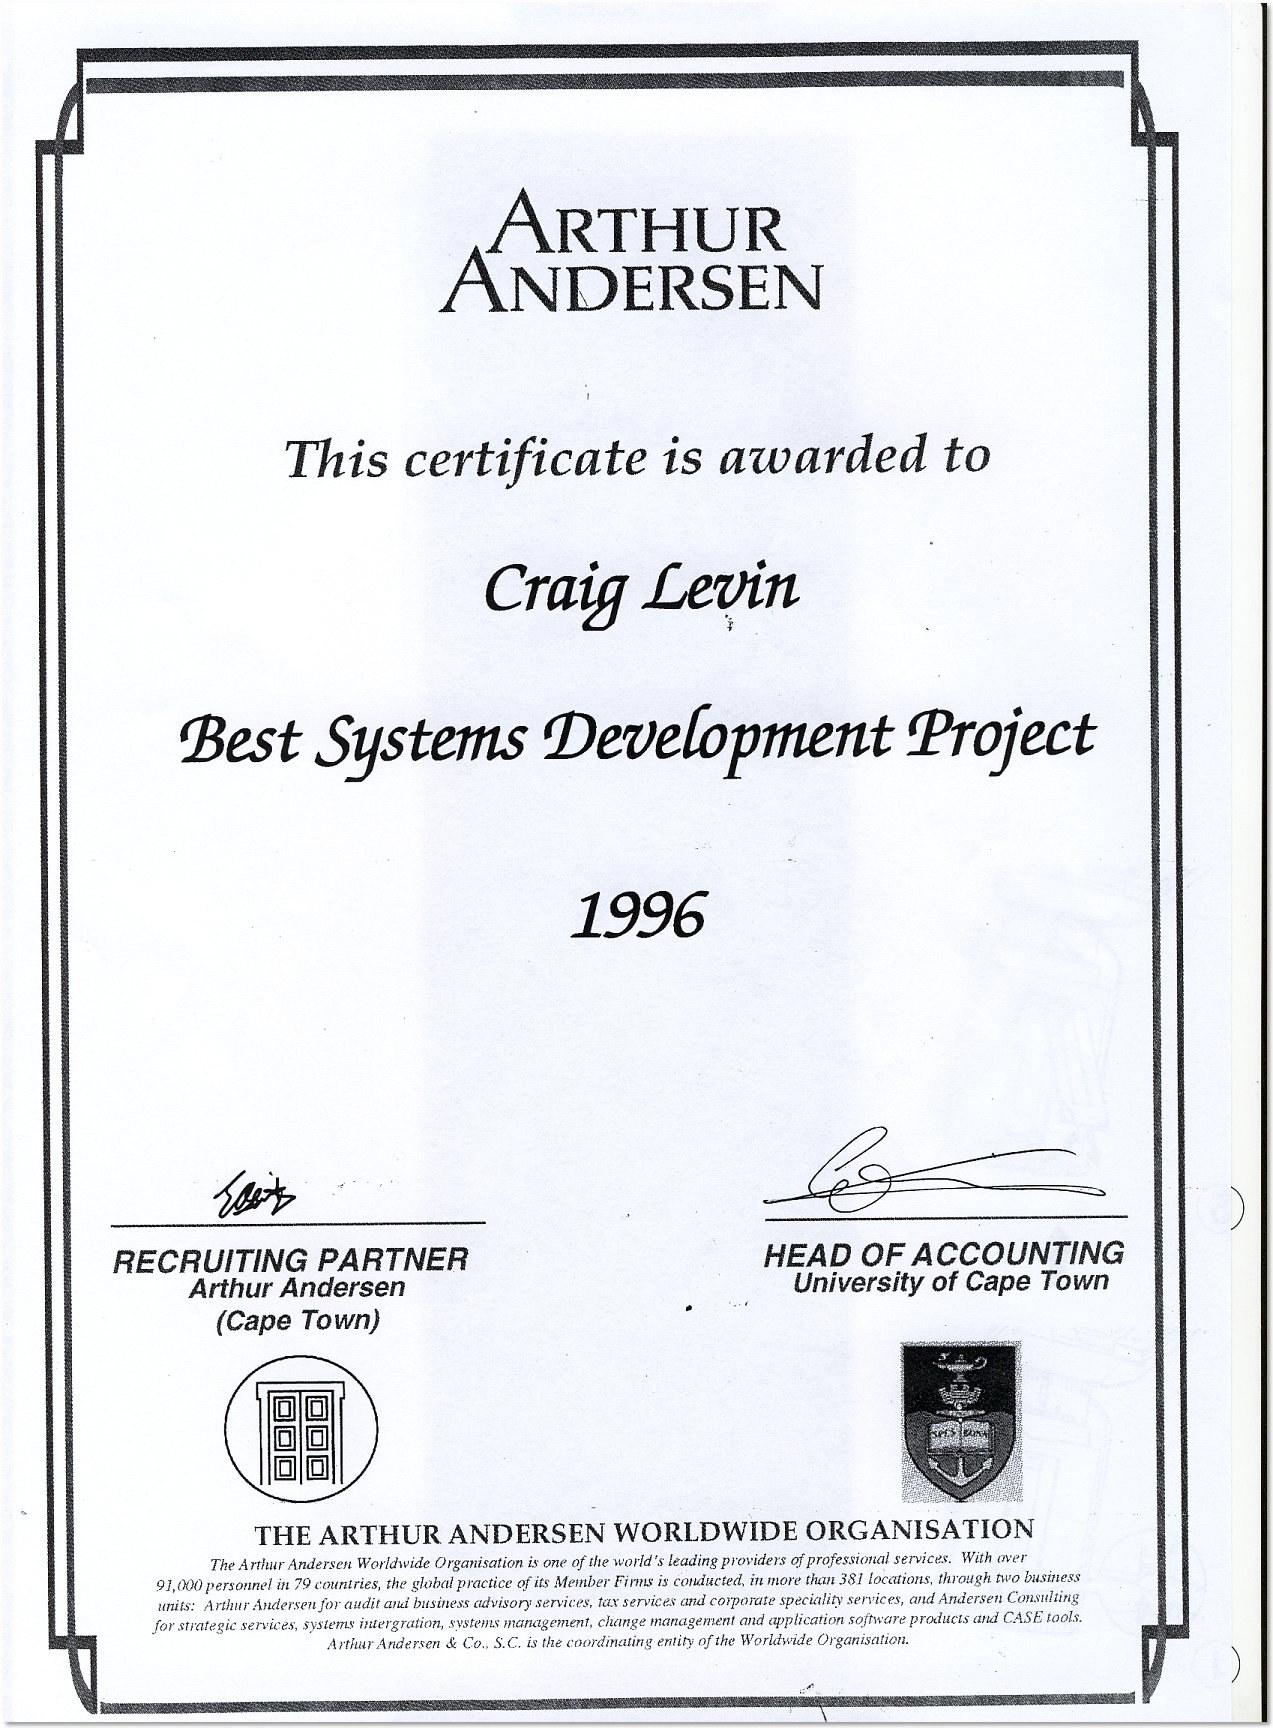 Best Systems Development Project